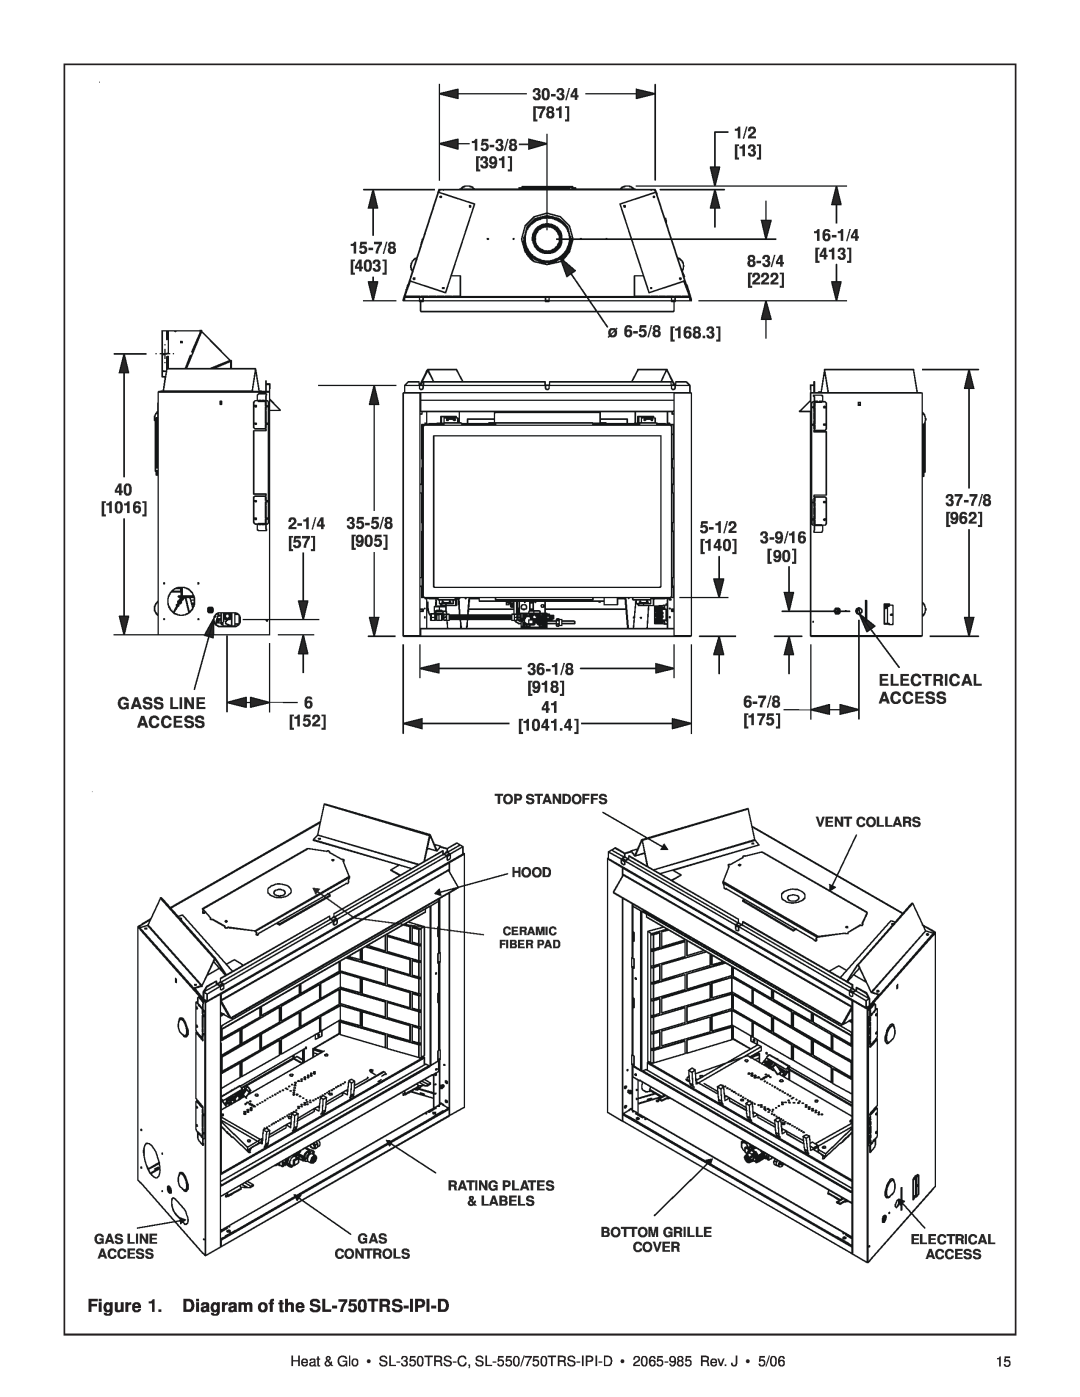 Heat & Glo LifeStyle owner manual Diagram of the SL-750TRS-IPI-D 